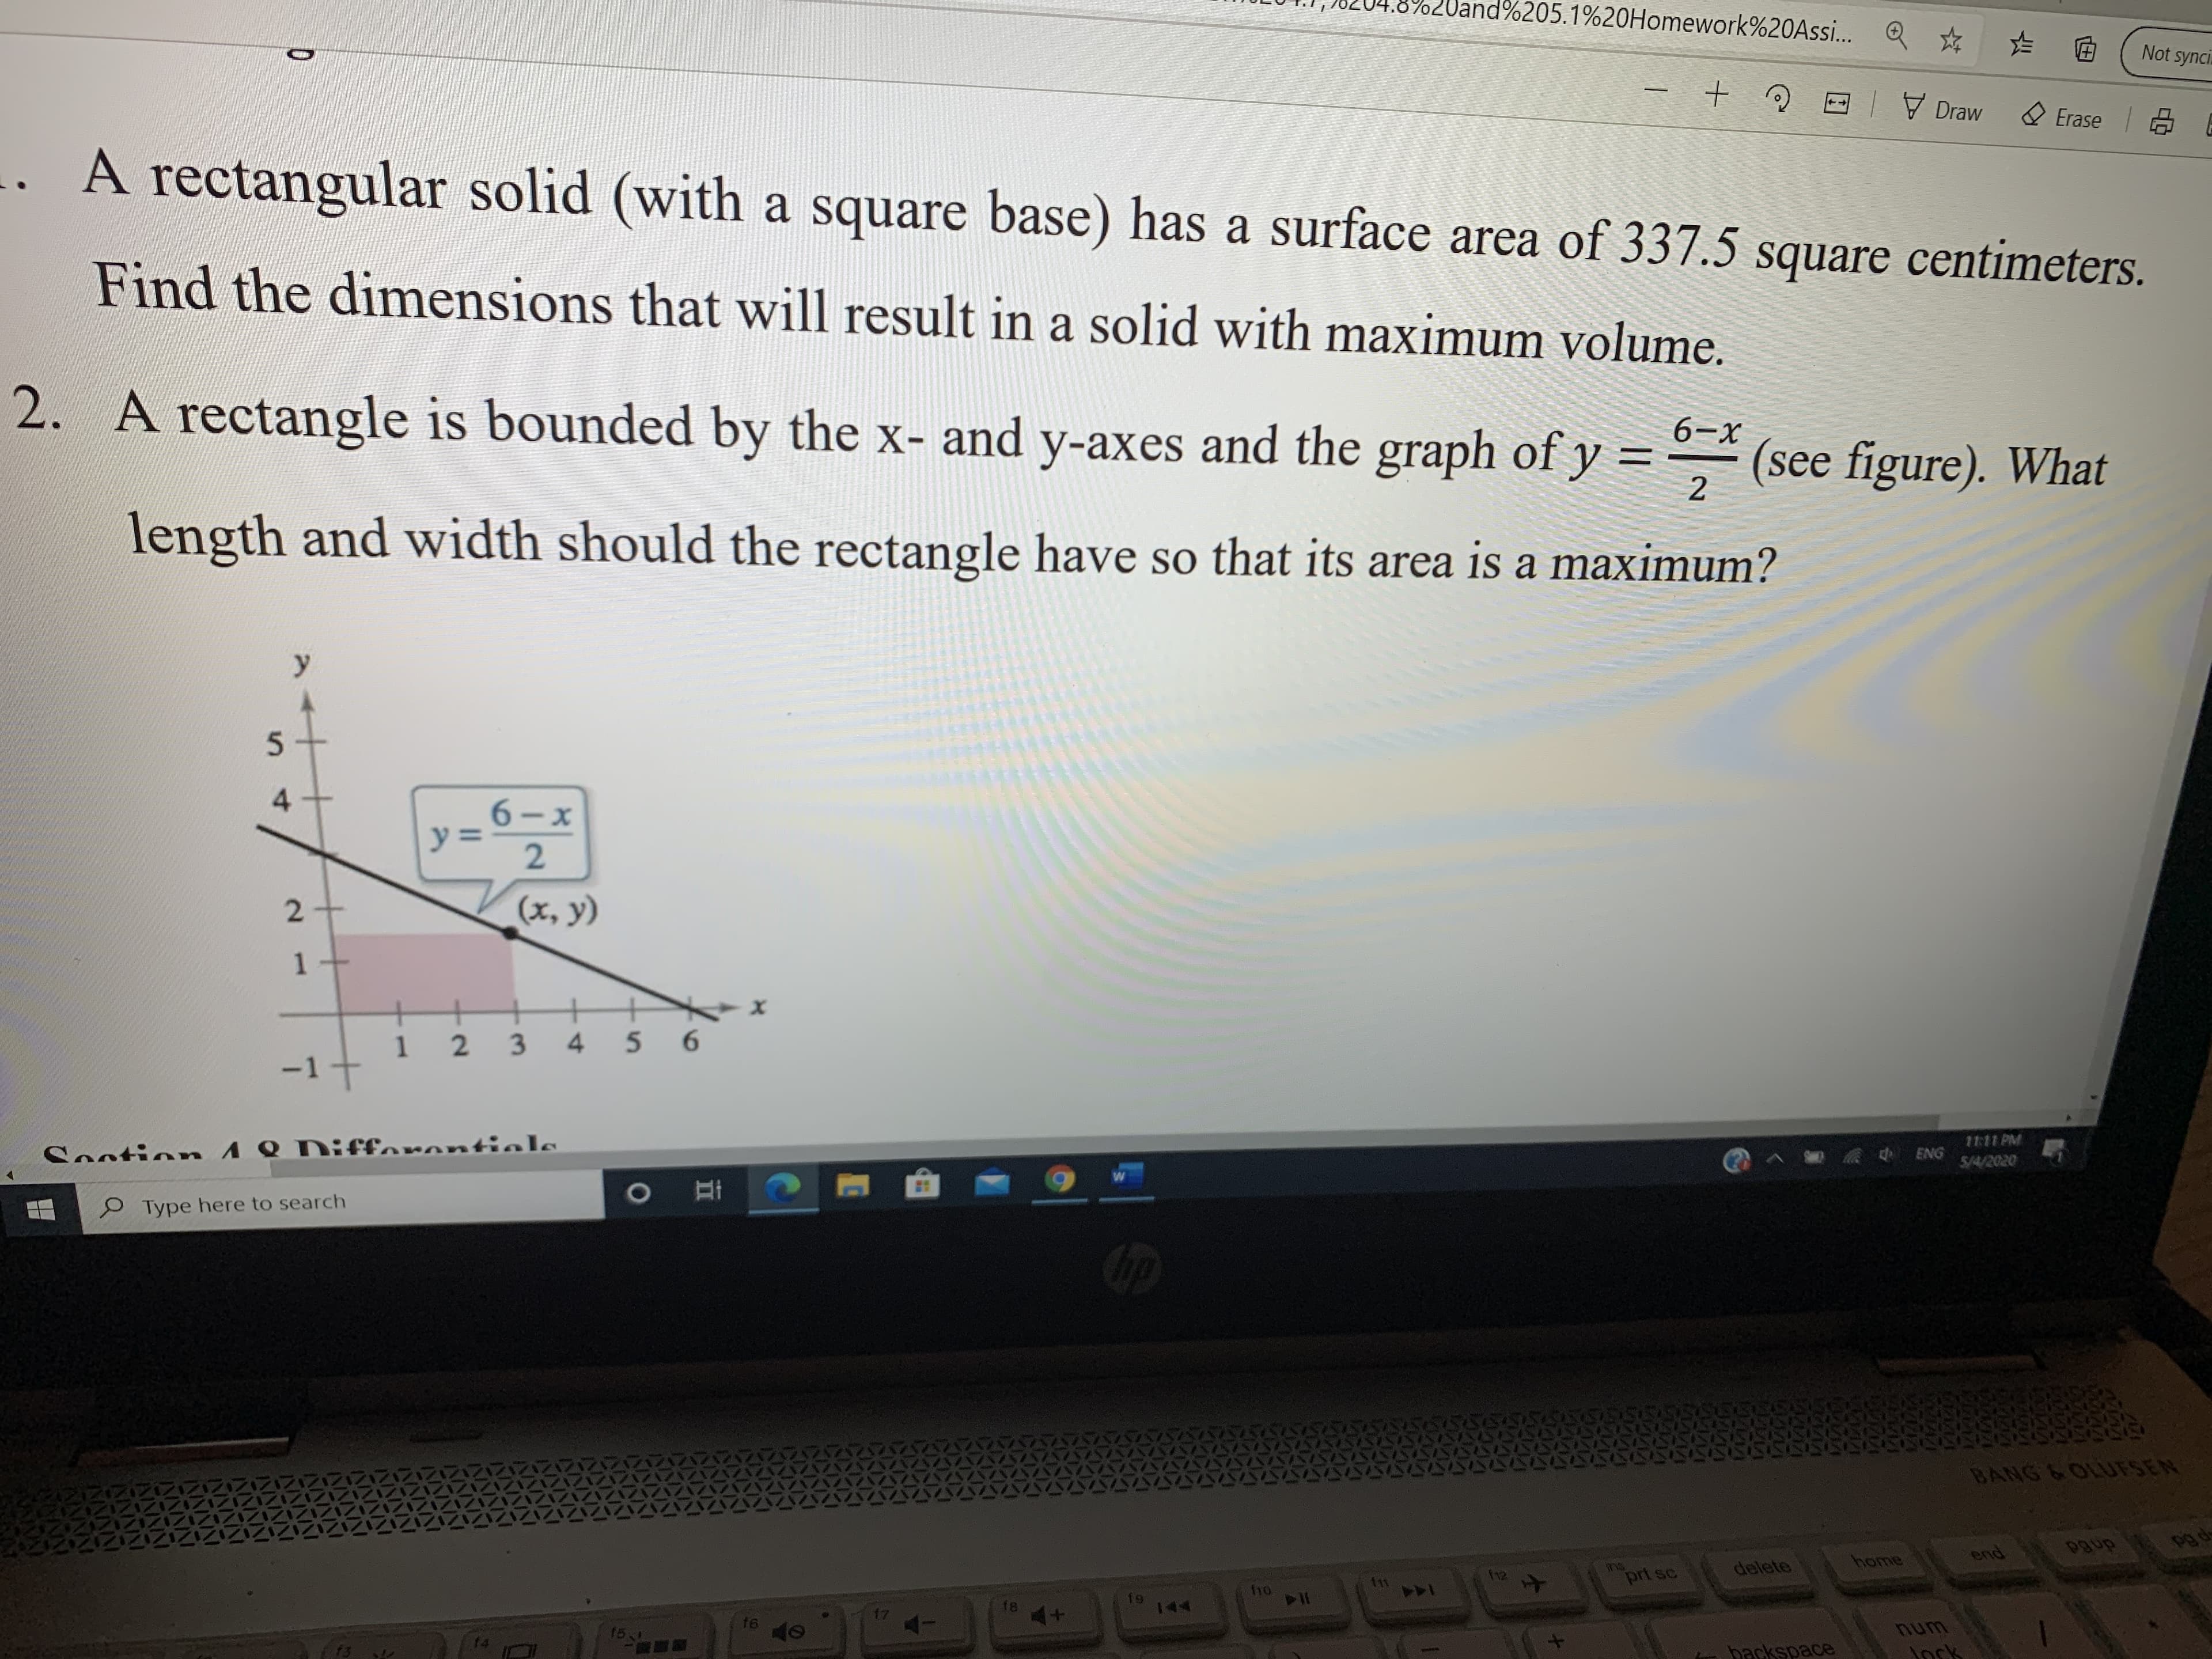 Uand Q * E
1%205.1%20Homework%20Assi..
Not synci.
E 7 Draw
Erase E
A rectangular solid (with a square base) has a surface area of 337.5 square centimeters.
Find the dimensions that will result in a solid with maximum volume.
2. A rectangle is bounded by the x- and y-axes and the graph of y = - (see figure). What
6-х
%3D
length and width should the rectangle have so that its area is a maximum?
4.
y%3=
(x, y)
1 2
34
56
-1
Sontion 4 8 Difforontiols
1111 PM
S/4/2020
ENG
O Type here to search
Op
BANG &OLIUFSEN
dned
pg de
home
end
ns
prt sc
delete
12
11
ho
f8
144
16
num
Jock
f4
f3
backspace
II
2.
1.
